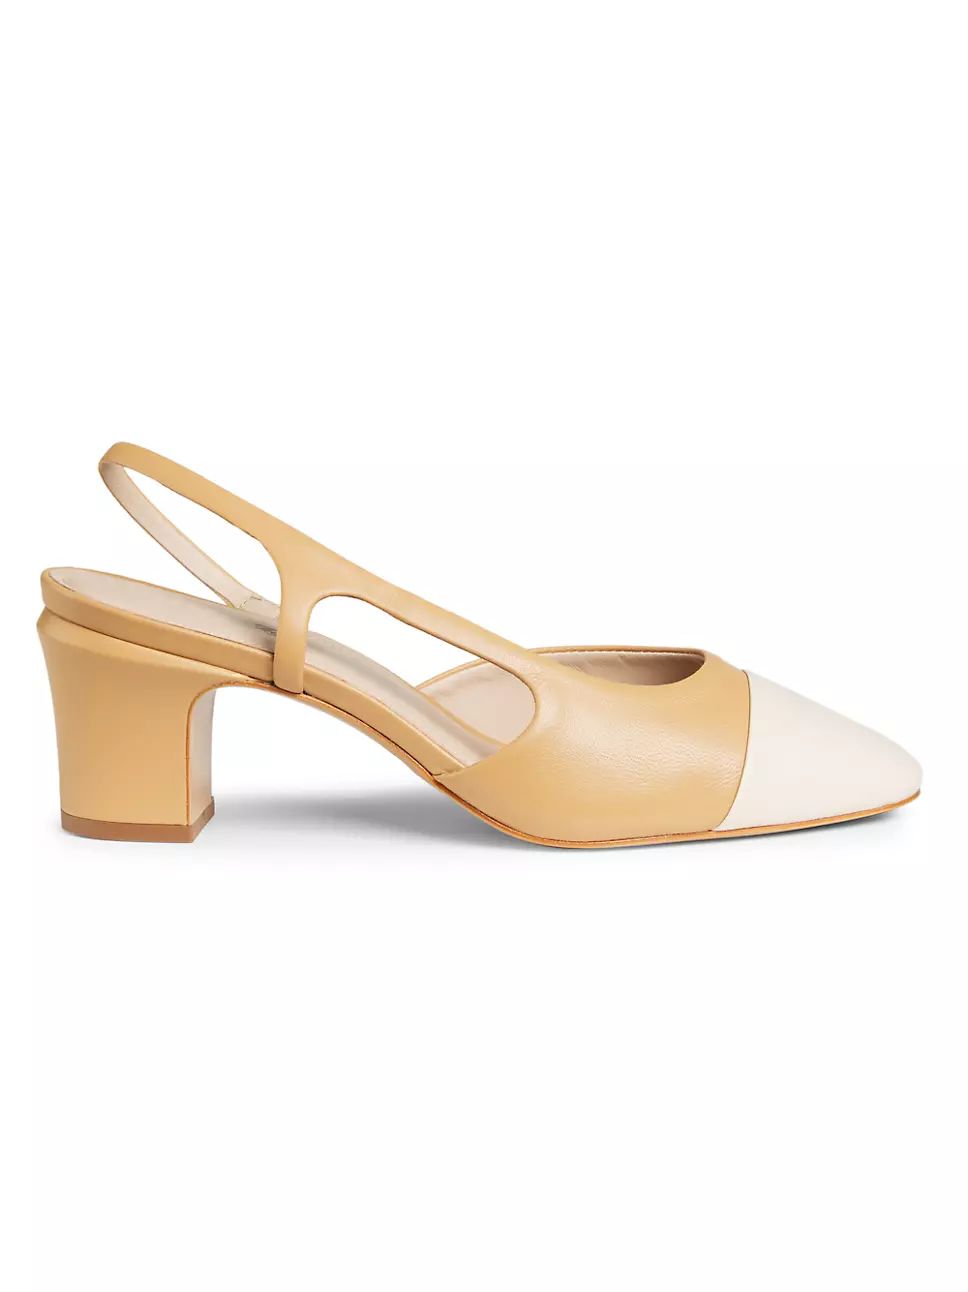 COLLECTION 60MM Leather Slingback Pumps | Saks Fifth Avenue